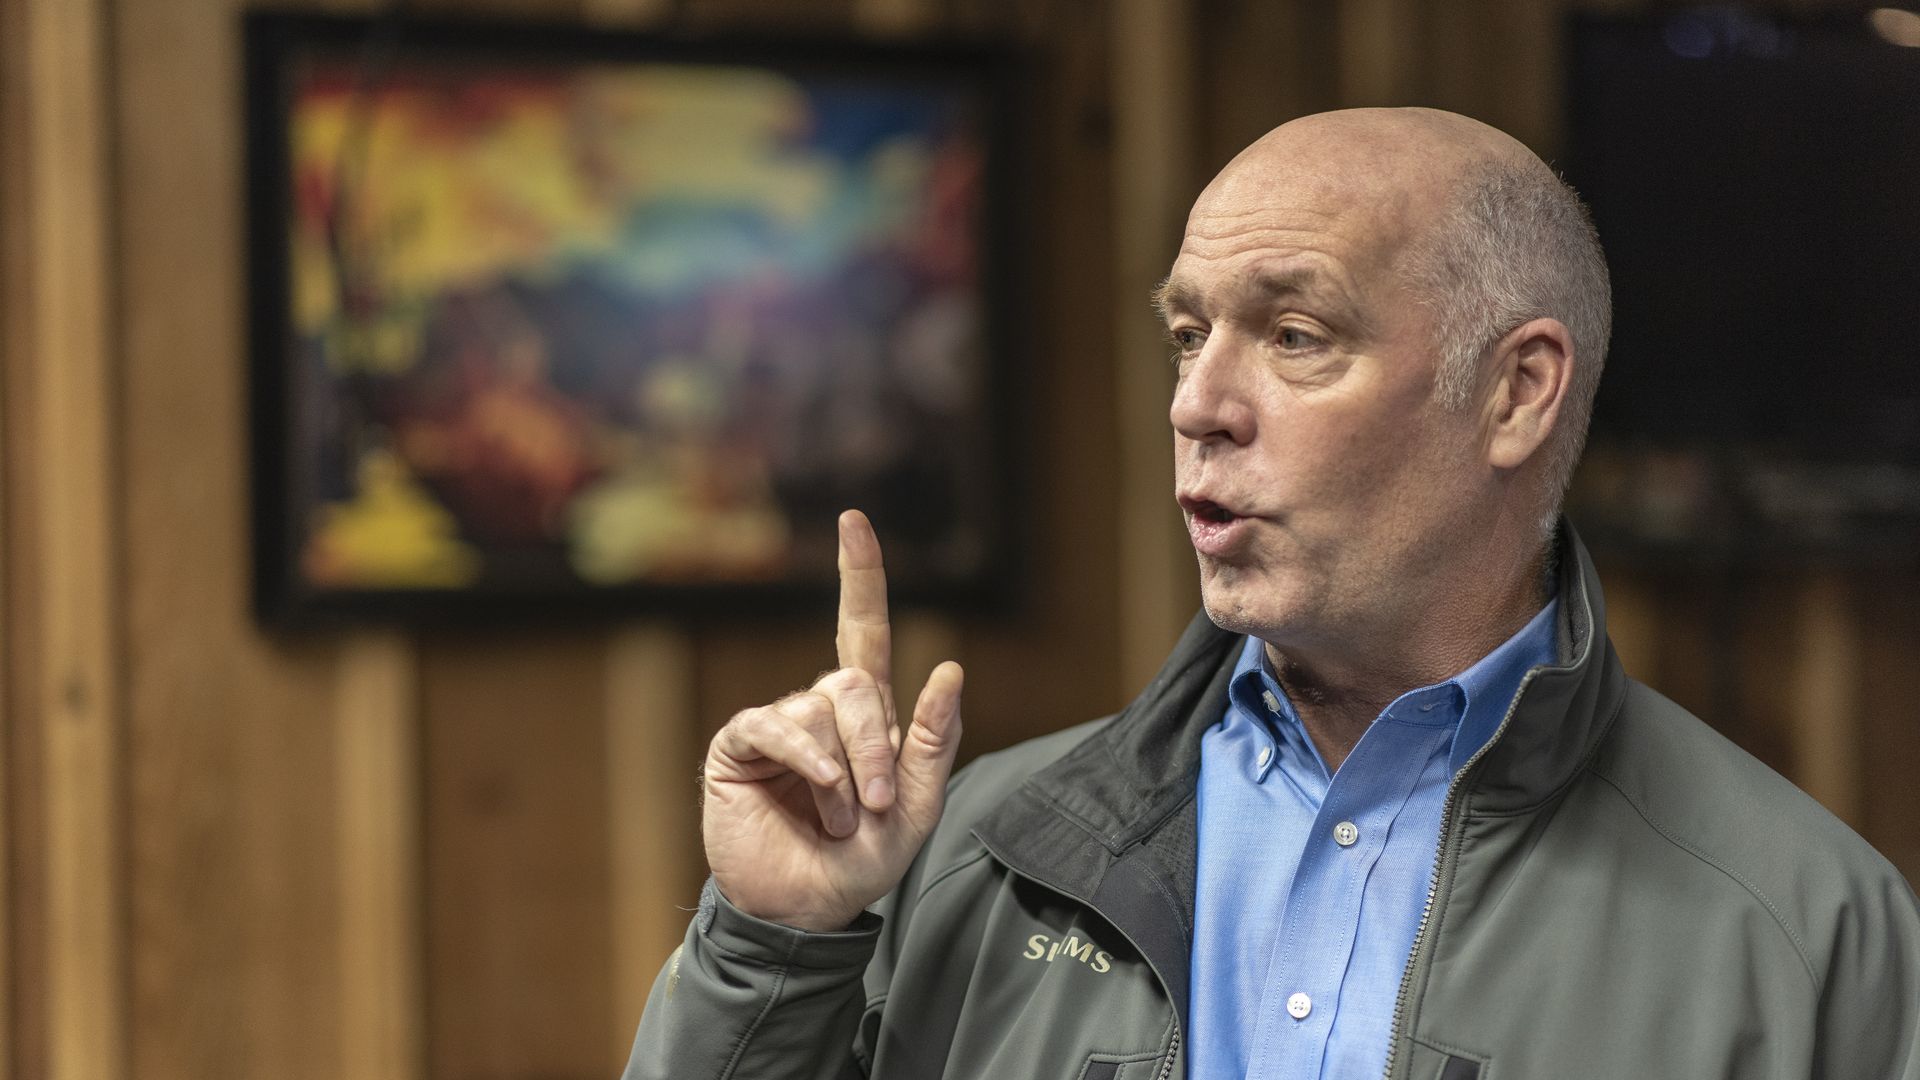 Then-Montana GOP Congressman Greg Gianforte meets with members of the business and environmental community at Chico Hot Springs below Emigrant Peak on October 10, 2018 in Pray, Montana.